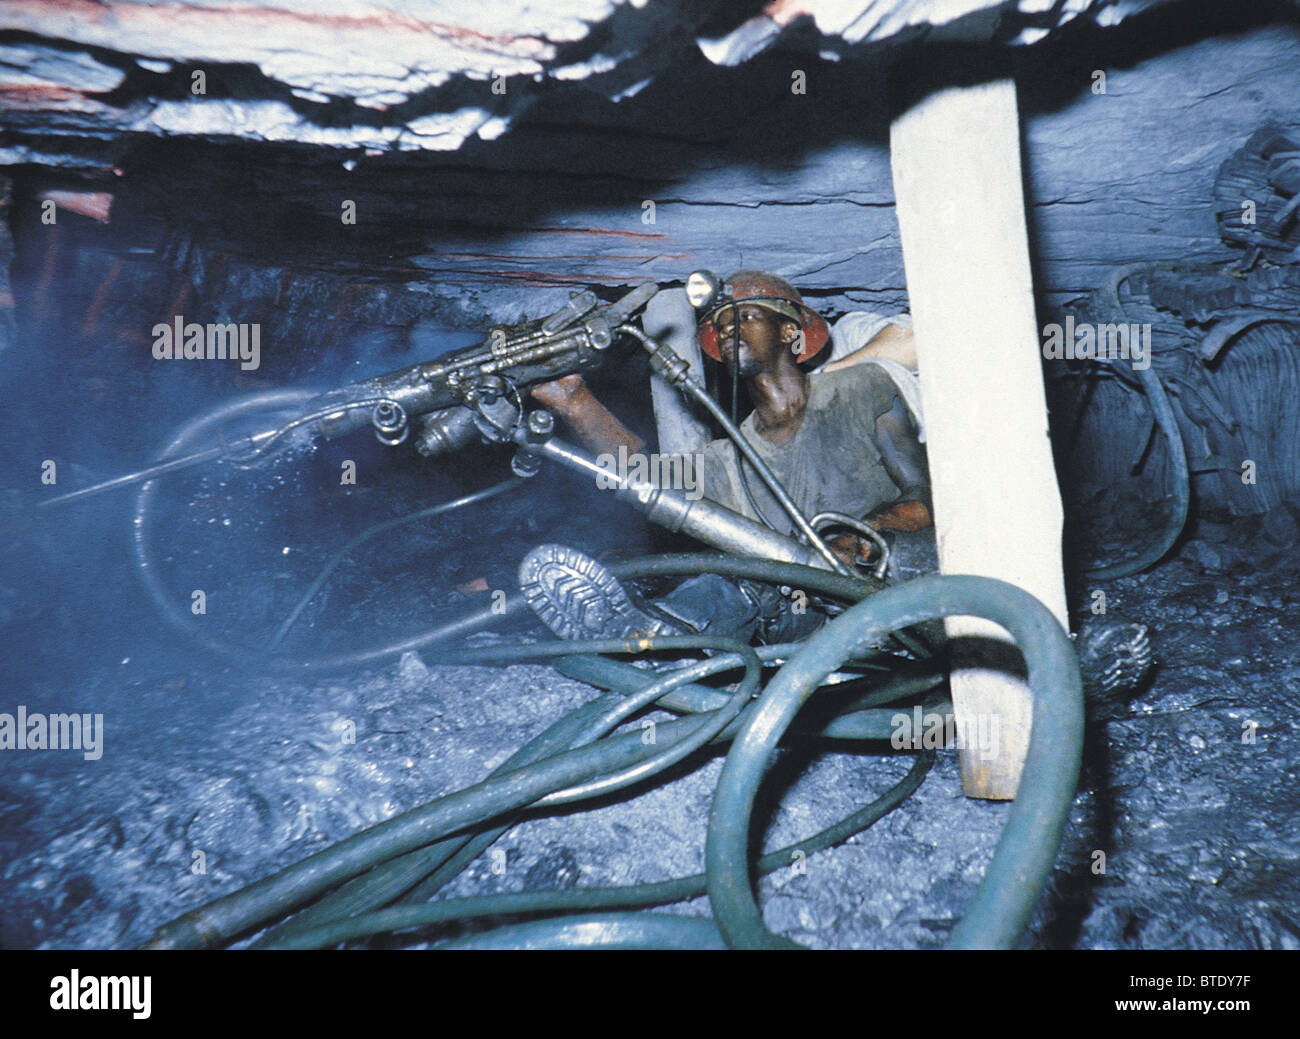 Drilling underground in a gold mine showing high pressure hoses and cramped working conditions. Stock Photo